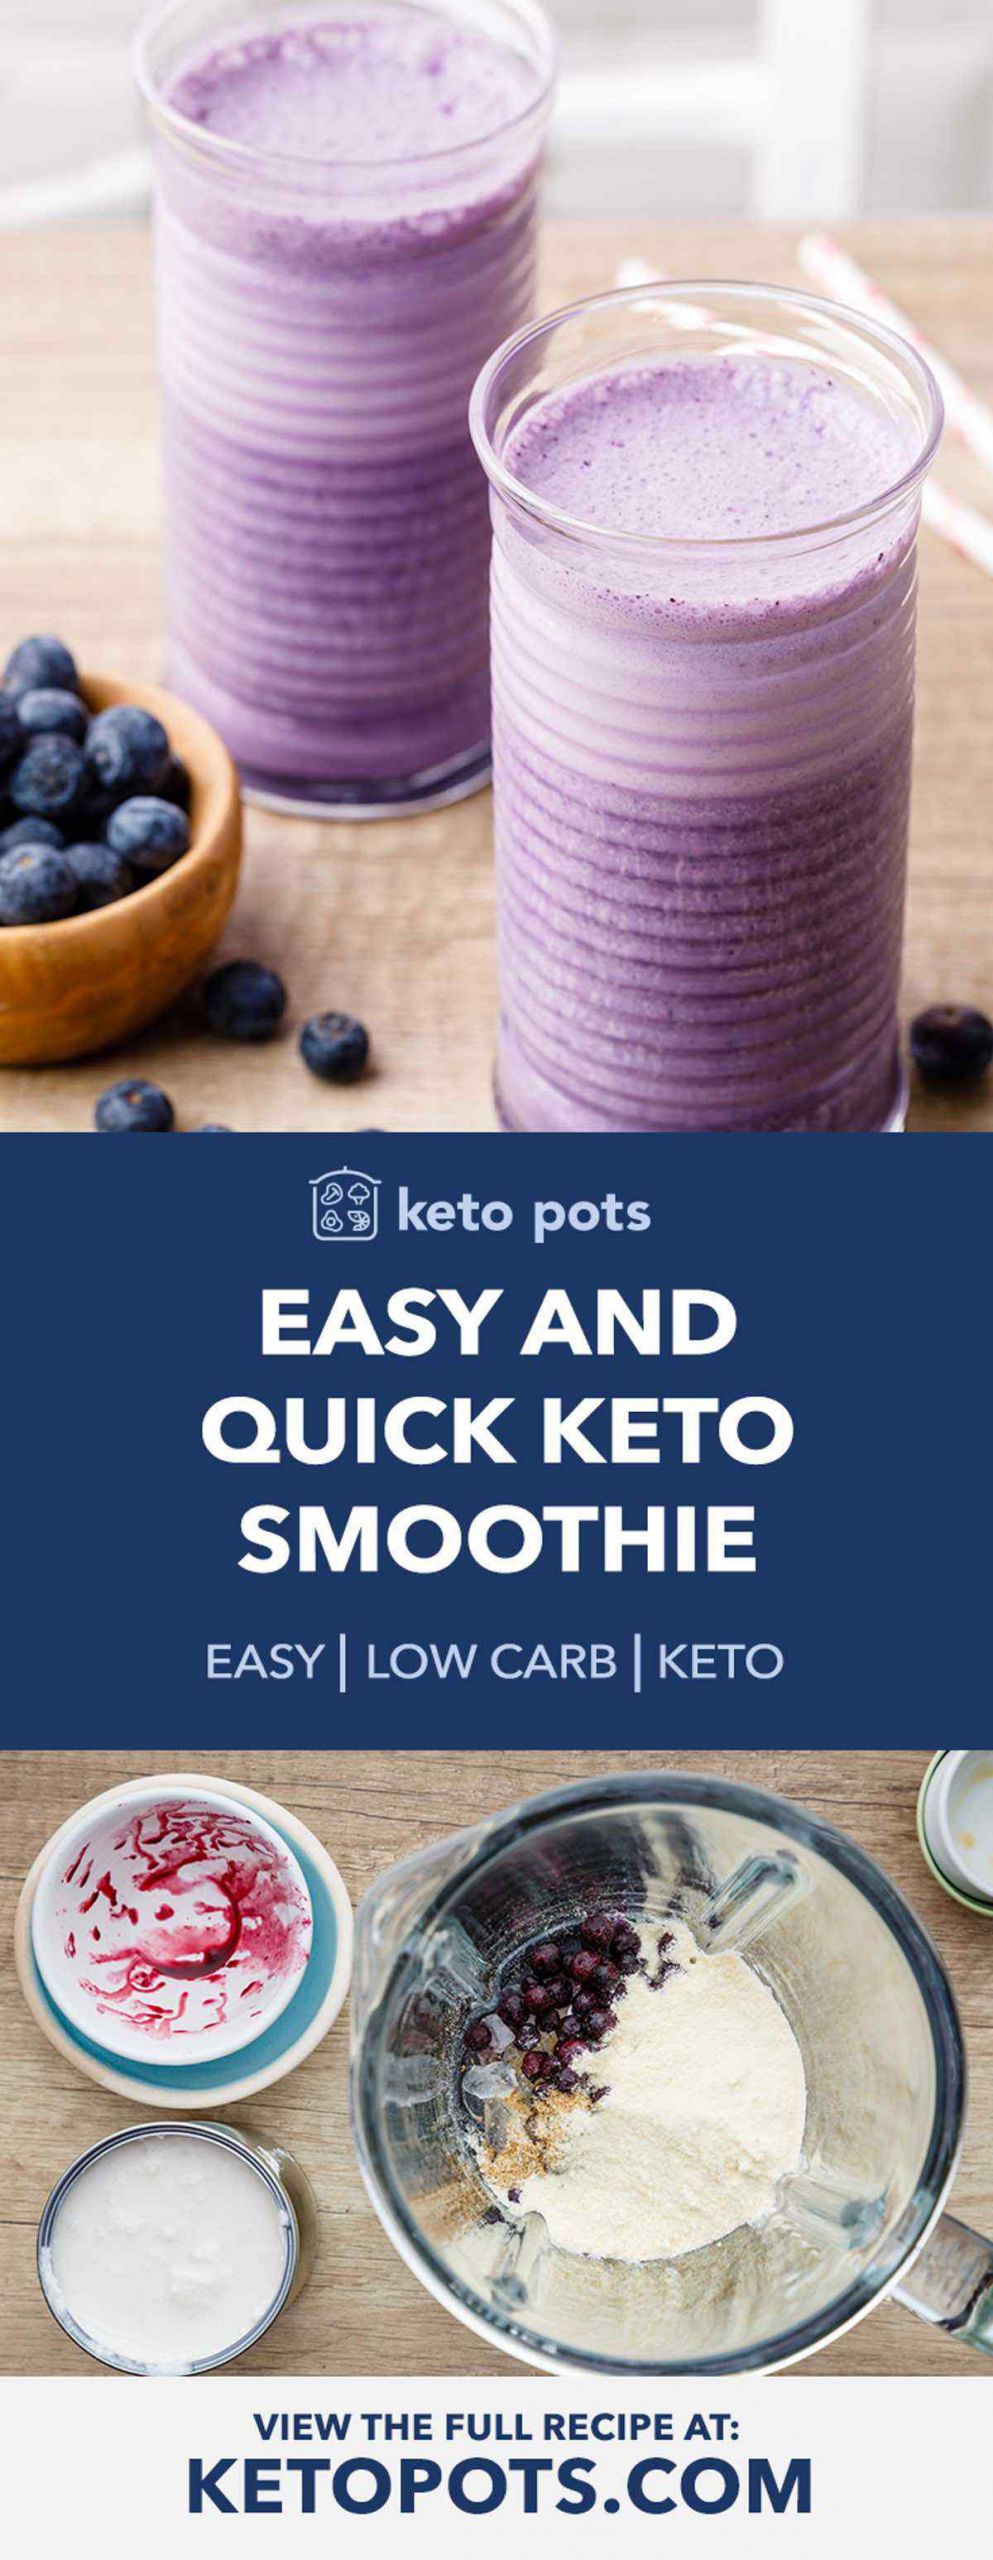 Easy Keto Smoothie Recipes
 Easy and Quick Keto Smoothie Recipe Low Carb and High in